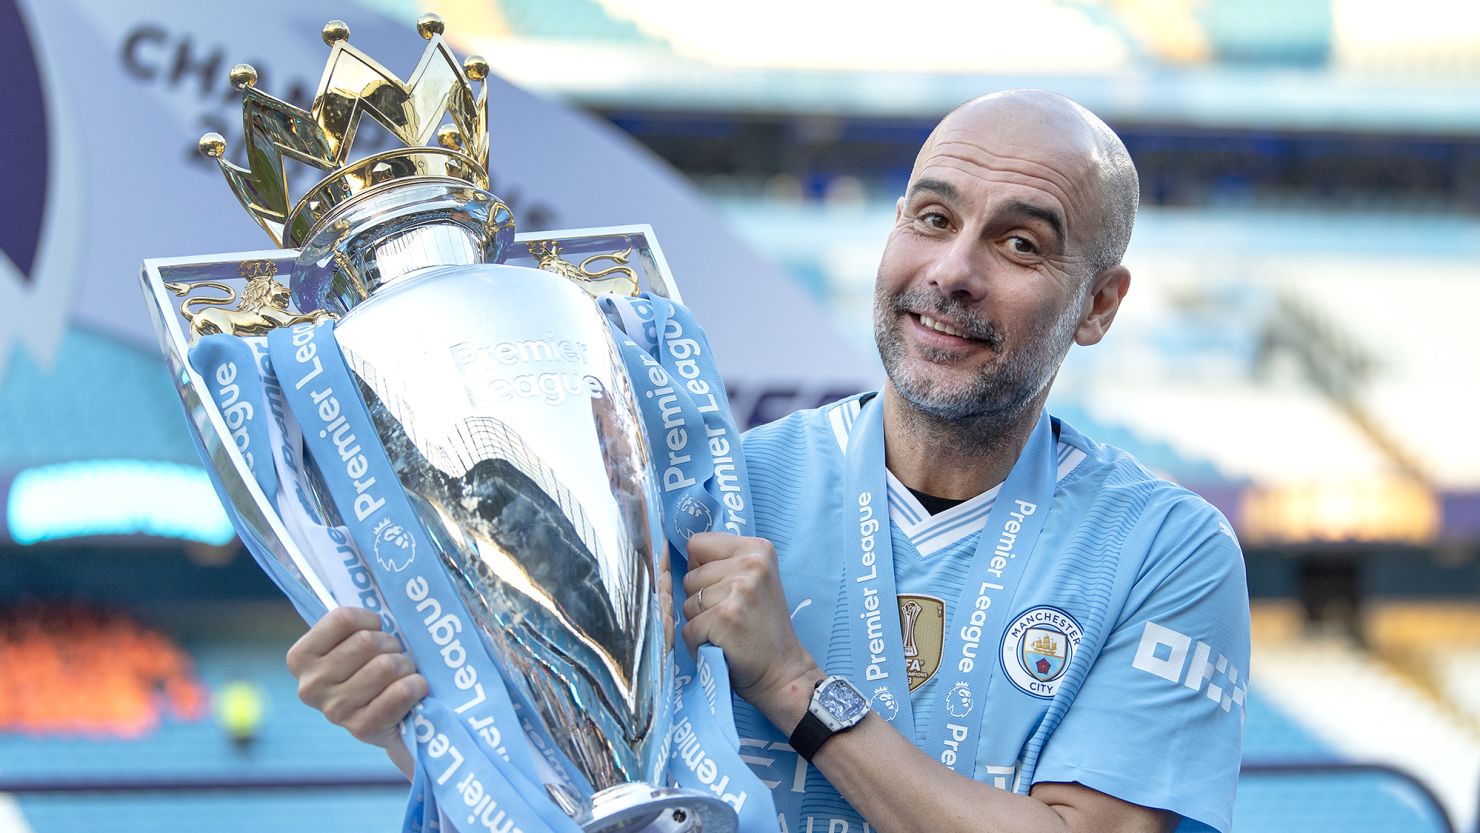 Pep Guardiola has said that he is ‘closer to leaving that staying' at Manchester City after the club won its fourth straight Premier League title on Sunday.